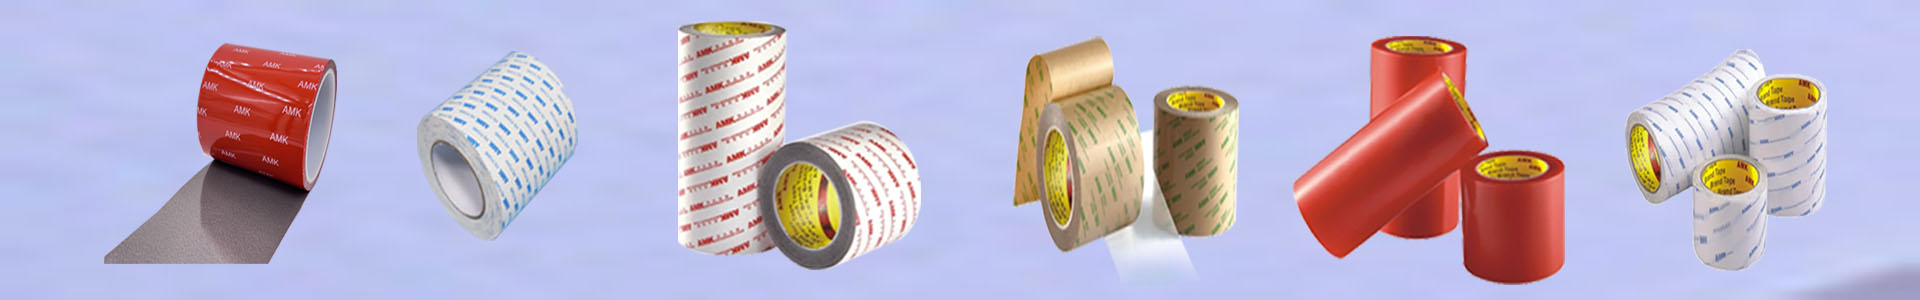 double sided adhesive tape | Manufacturers of double-sided tape